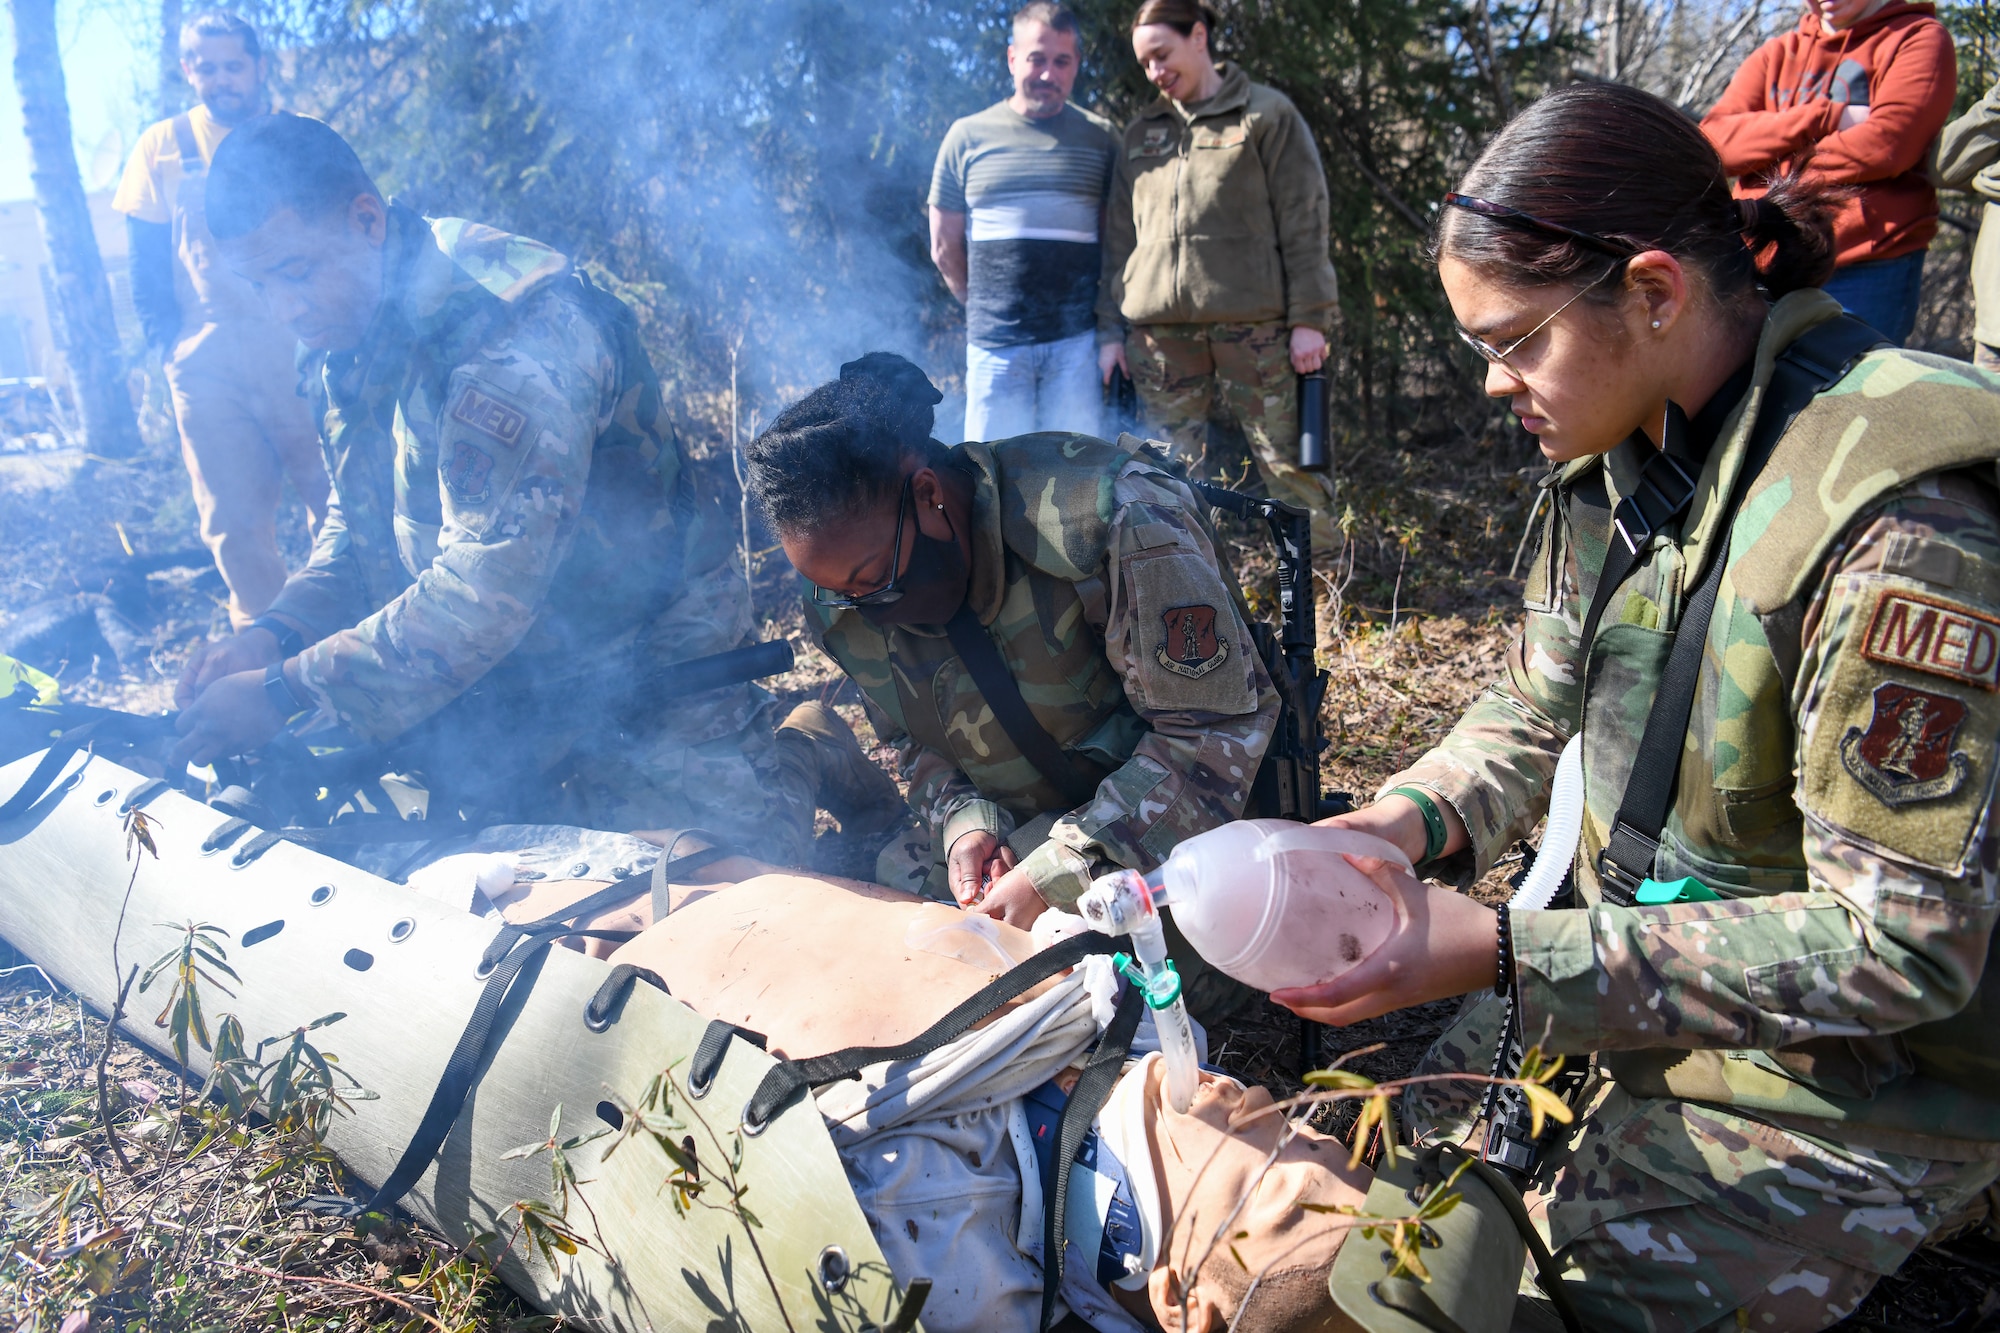 N.Y. Air National Guard airmen from the 106th Rescue Wing, Westhampton Beach, N.Y., package a “patient,” an advanced medical simulation dummy, for transport to a safe location at Joint Base Elmendorf-Richardson in Anchorage, Alaska, May 5, 2022. The combat medics of the 106th Medical Group participated in their first Military Facility Annual Training since the start of the COVID-19 pandemic, and were expected to encounter a patient, assess the injuries, mitigate the risk, stop bleeding, treat secondary wounds, and/or resuscitate the patient and maintain the airway. (Air National Guard photo by SSgt Daniel H. Farrell)